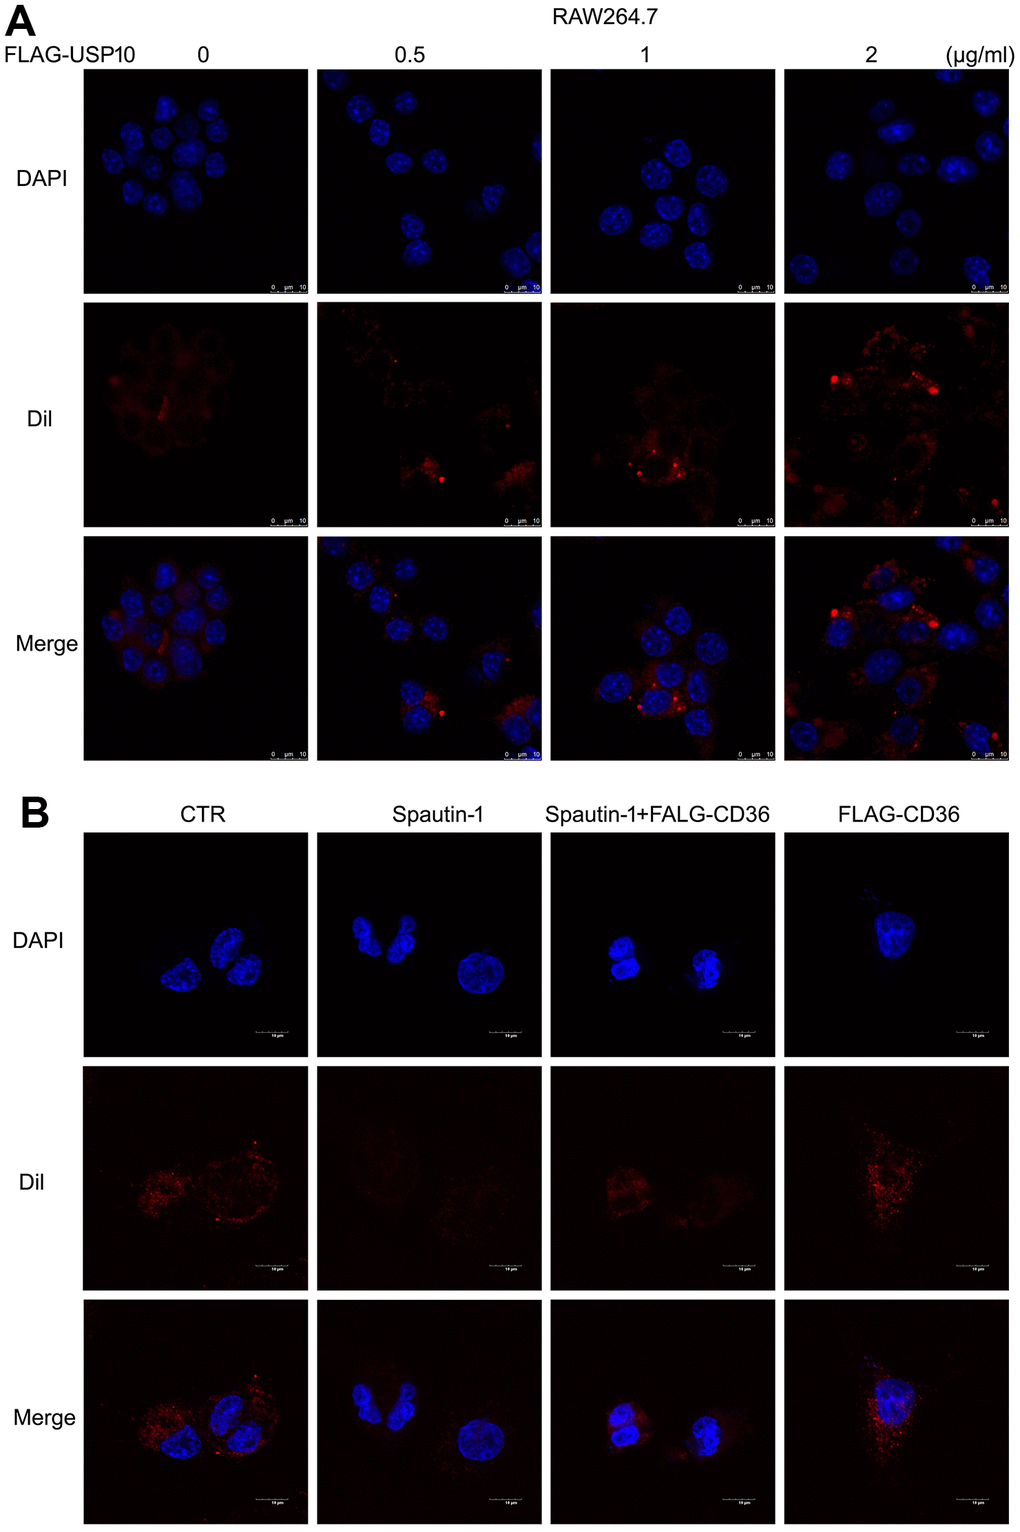 USP10-mediated lipid uptake depends on CD36 expression. (A) Macrophage was transfected with FLAG-USP10 plasmid with different doses for 48 h, followed by Dil-oxLDL for 6 h. (B) Macrophage was treated with Spautin-1 and /or FLAG-CD36 plasmid for 48 h. Dil-oxLDL was added for the additional 6 h. DAPI for cell nucleus. The images were taken by confocal microscopy.